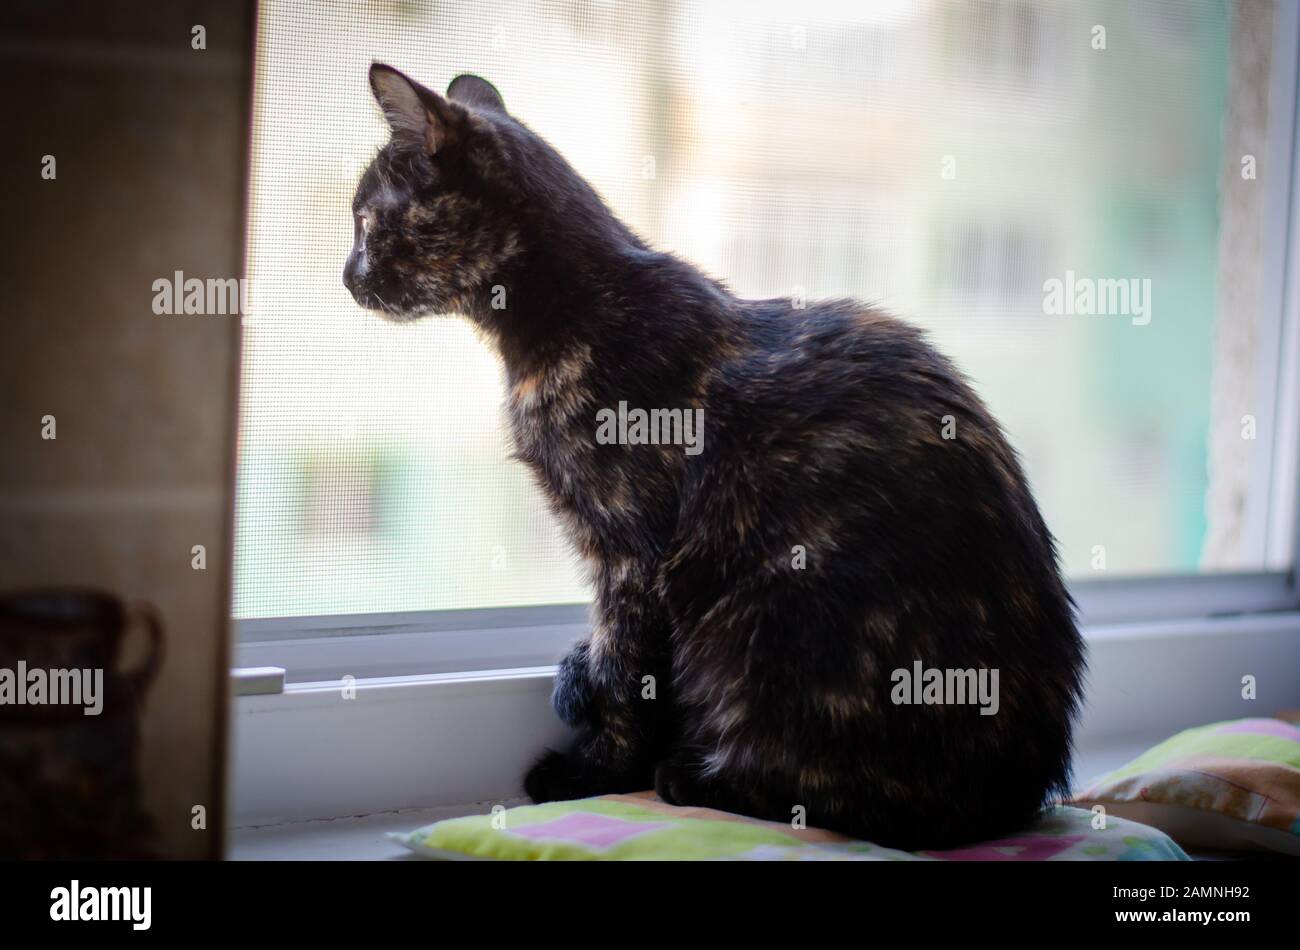 Tortie kitten sitting at window watching closely Stock Photo